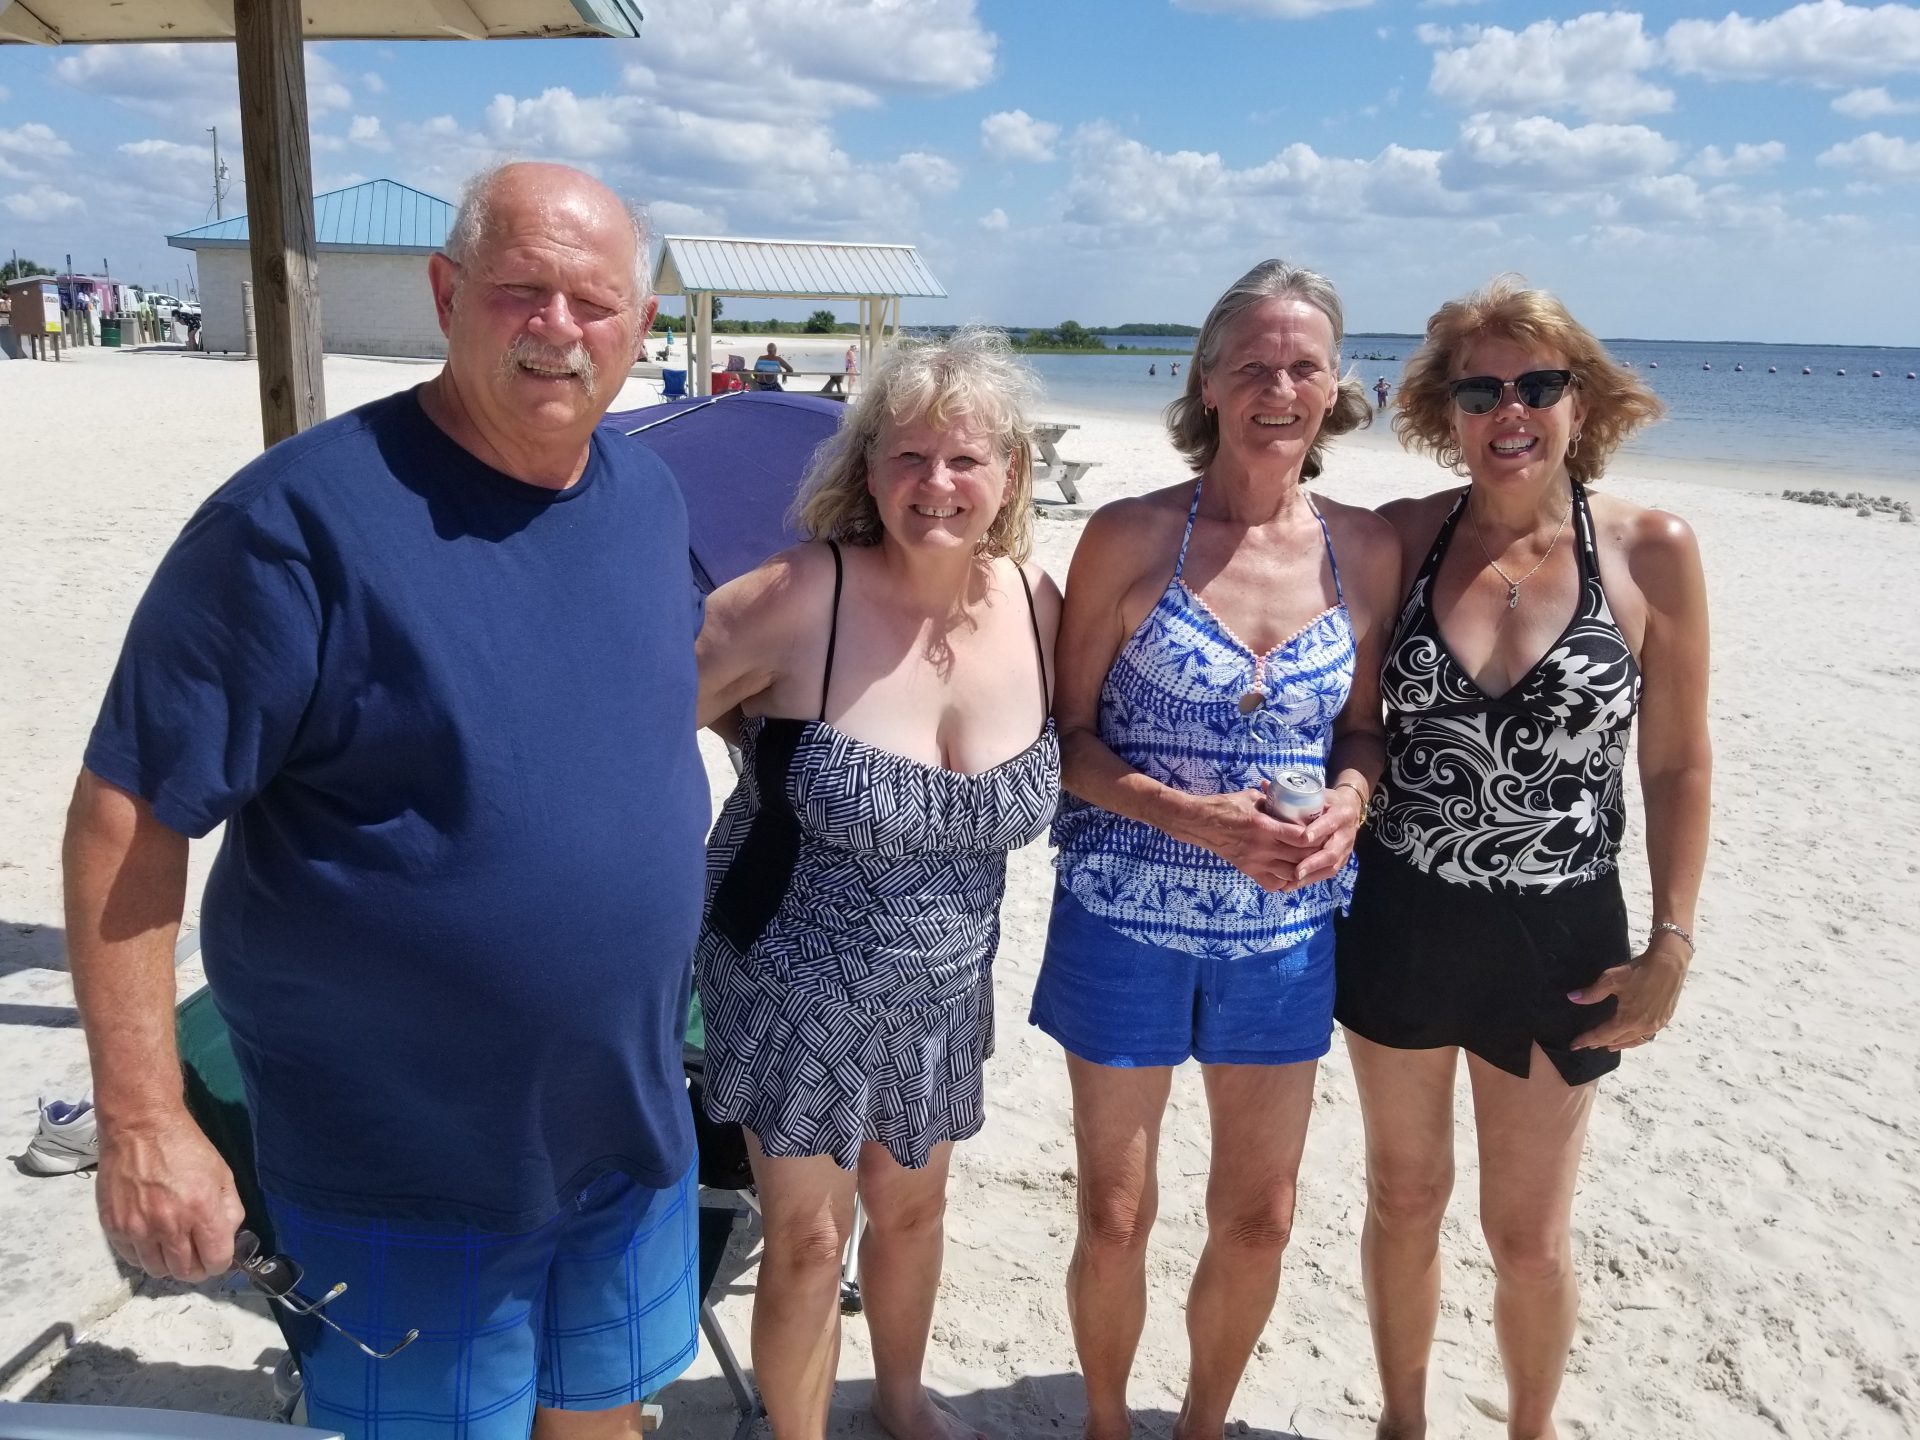 Don and his "Beach Babes"